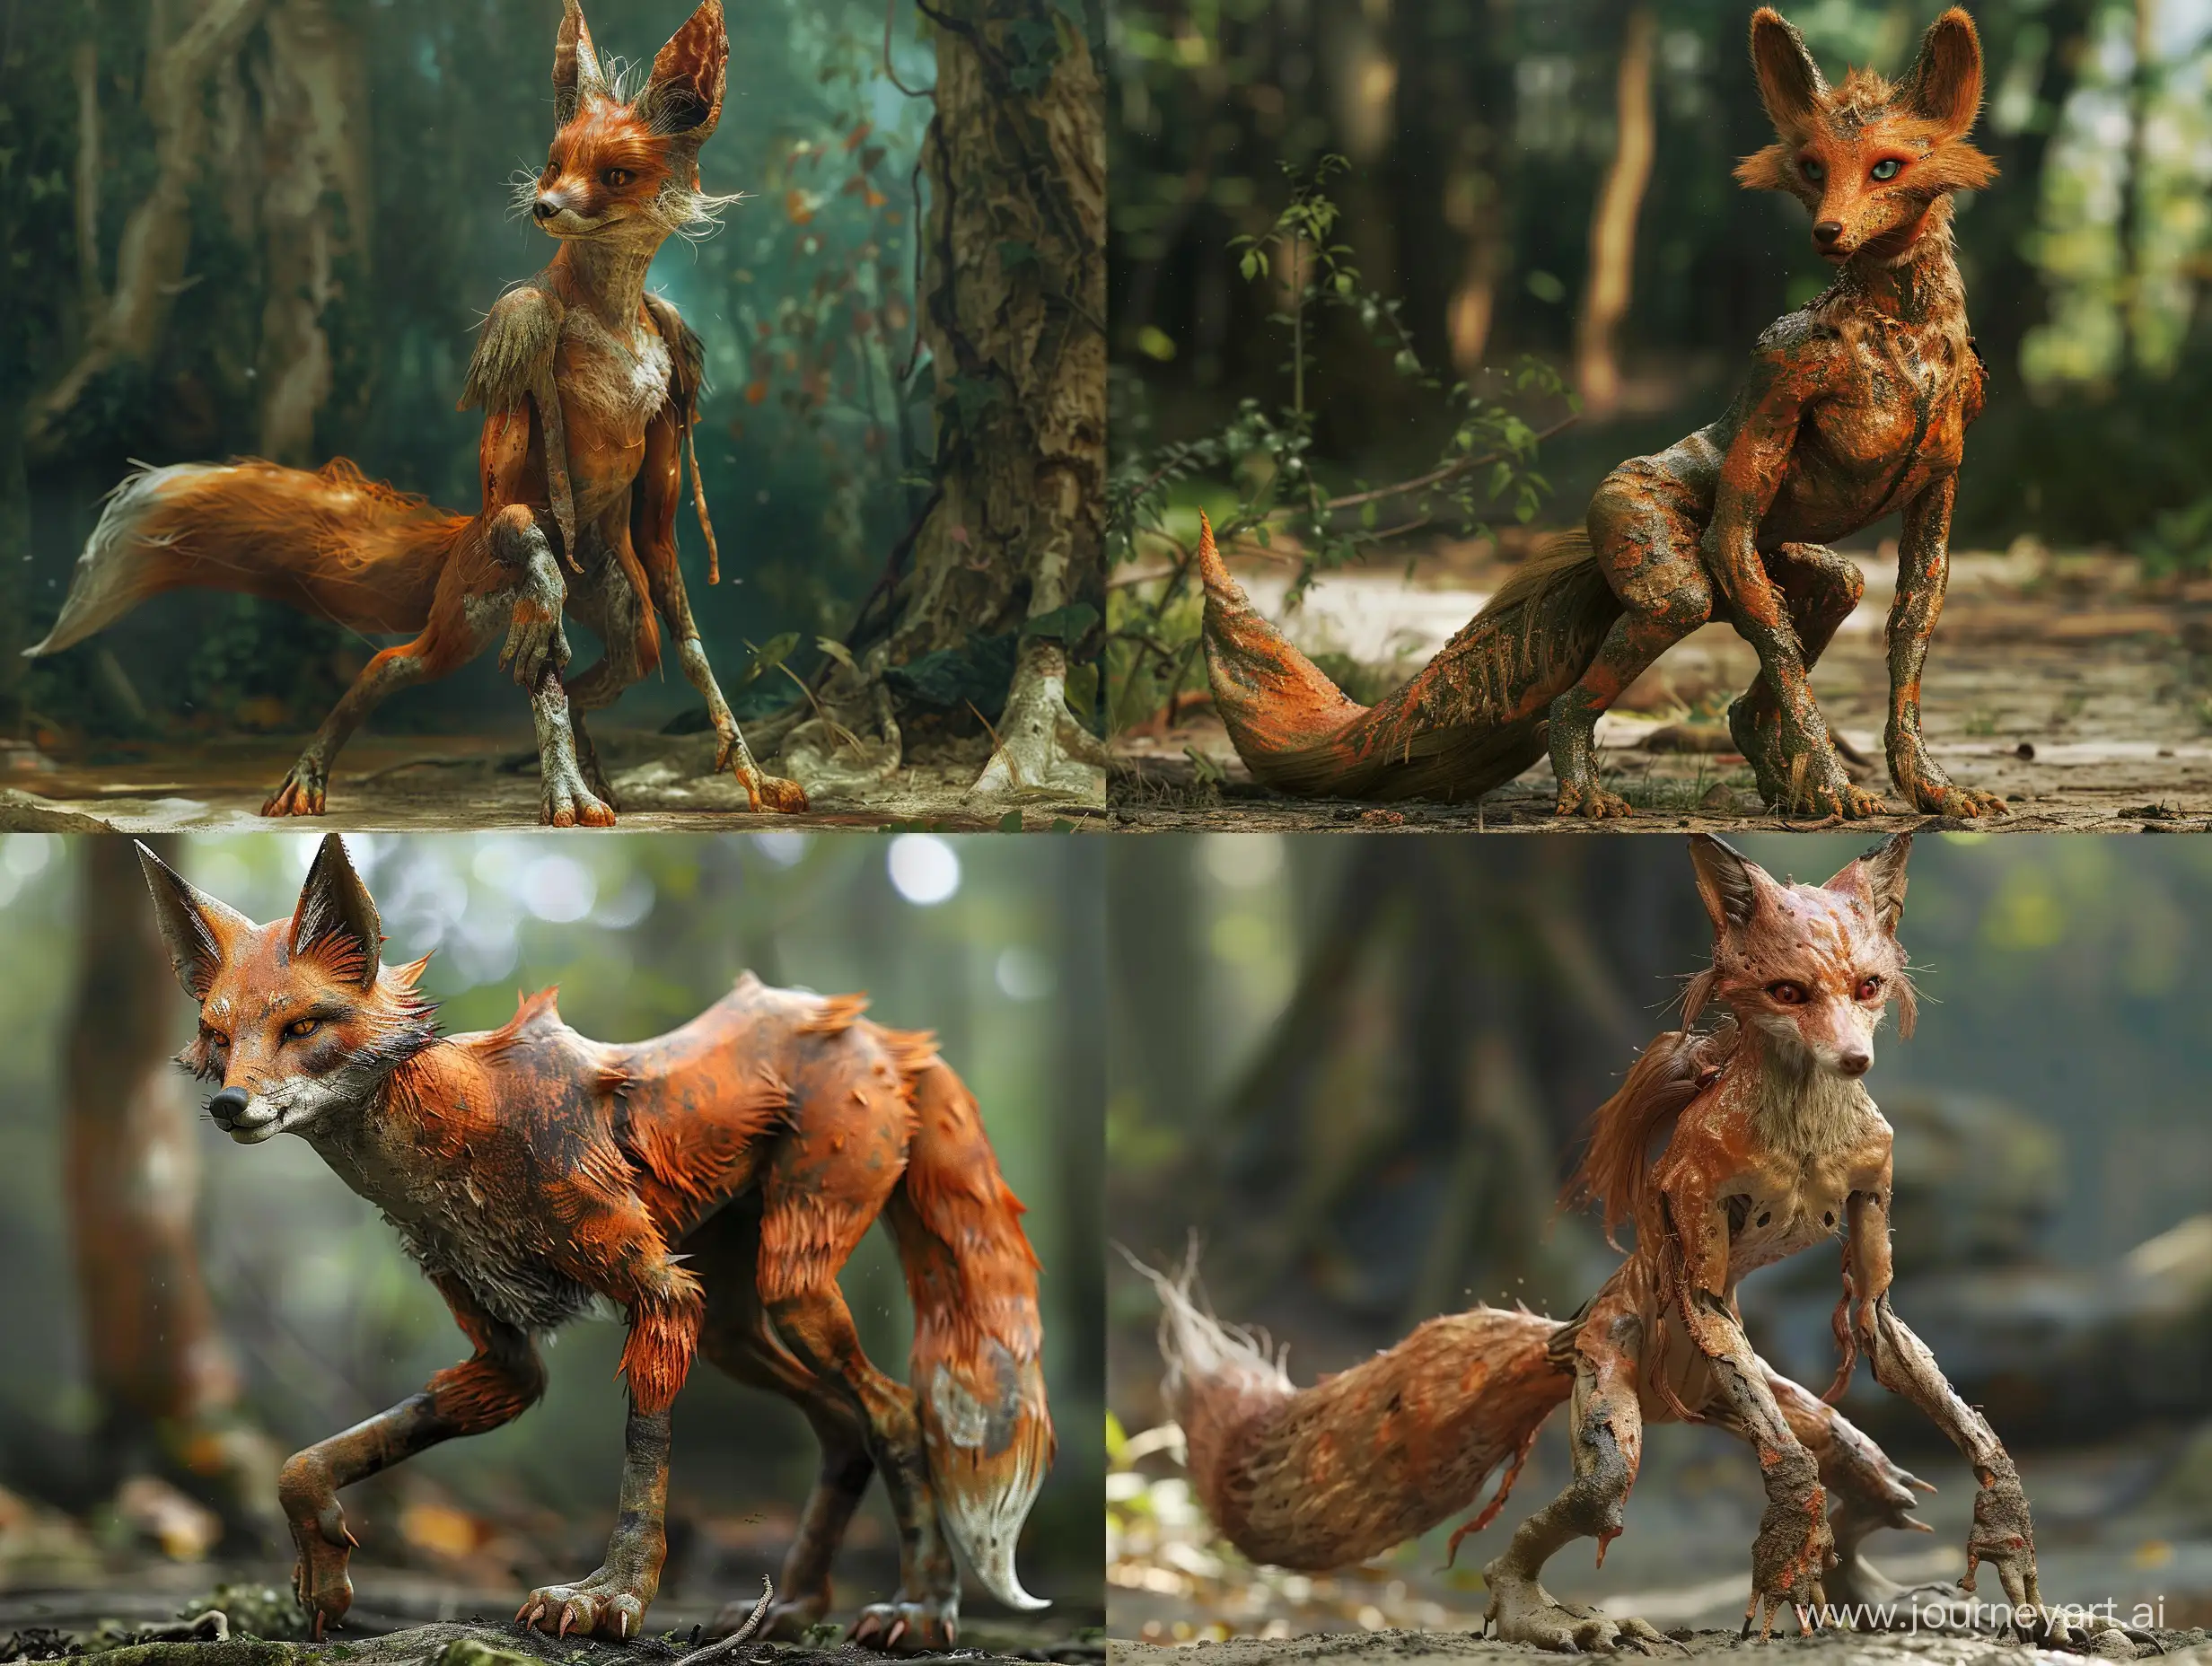 Medieval-Fox-Princess-in-Enchanted-Forest-Transformation-Art